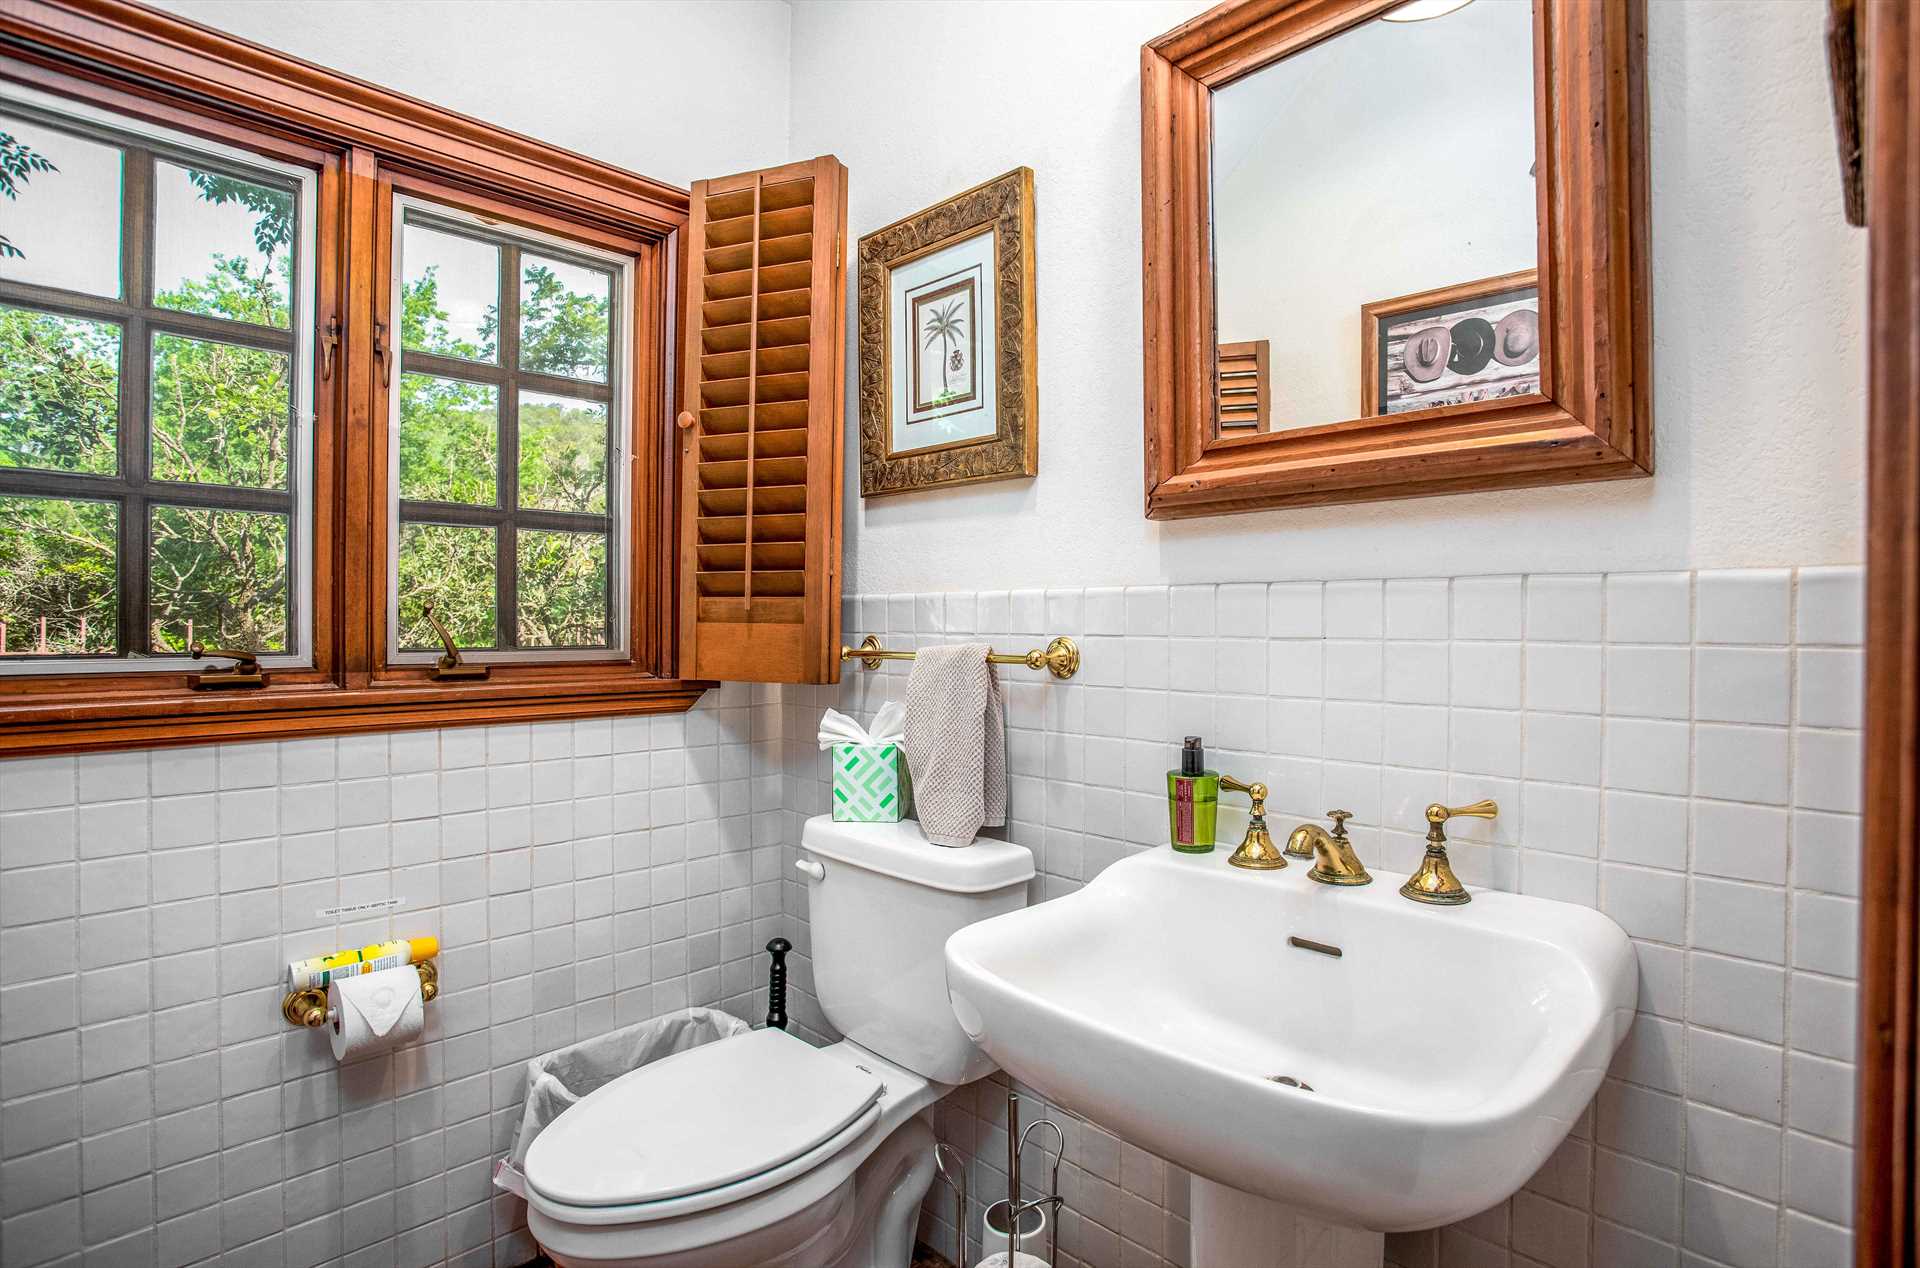                                                 A supplemental half-bath at the Homestead provides space for quick cleanup!